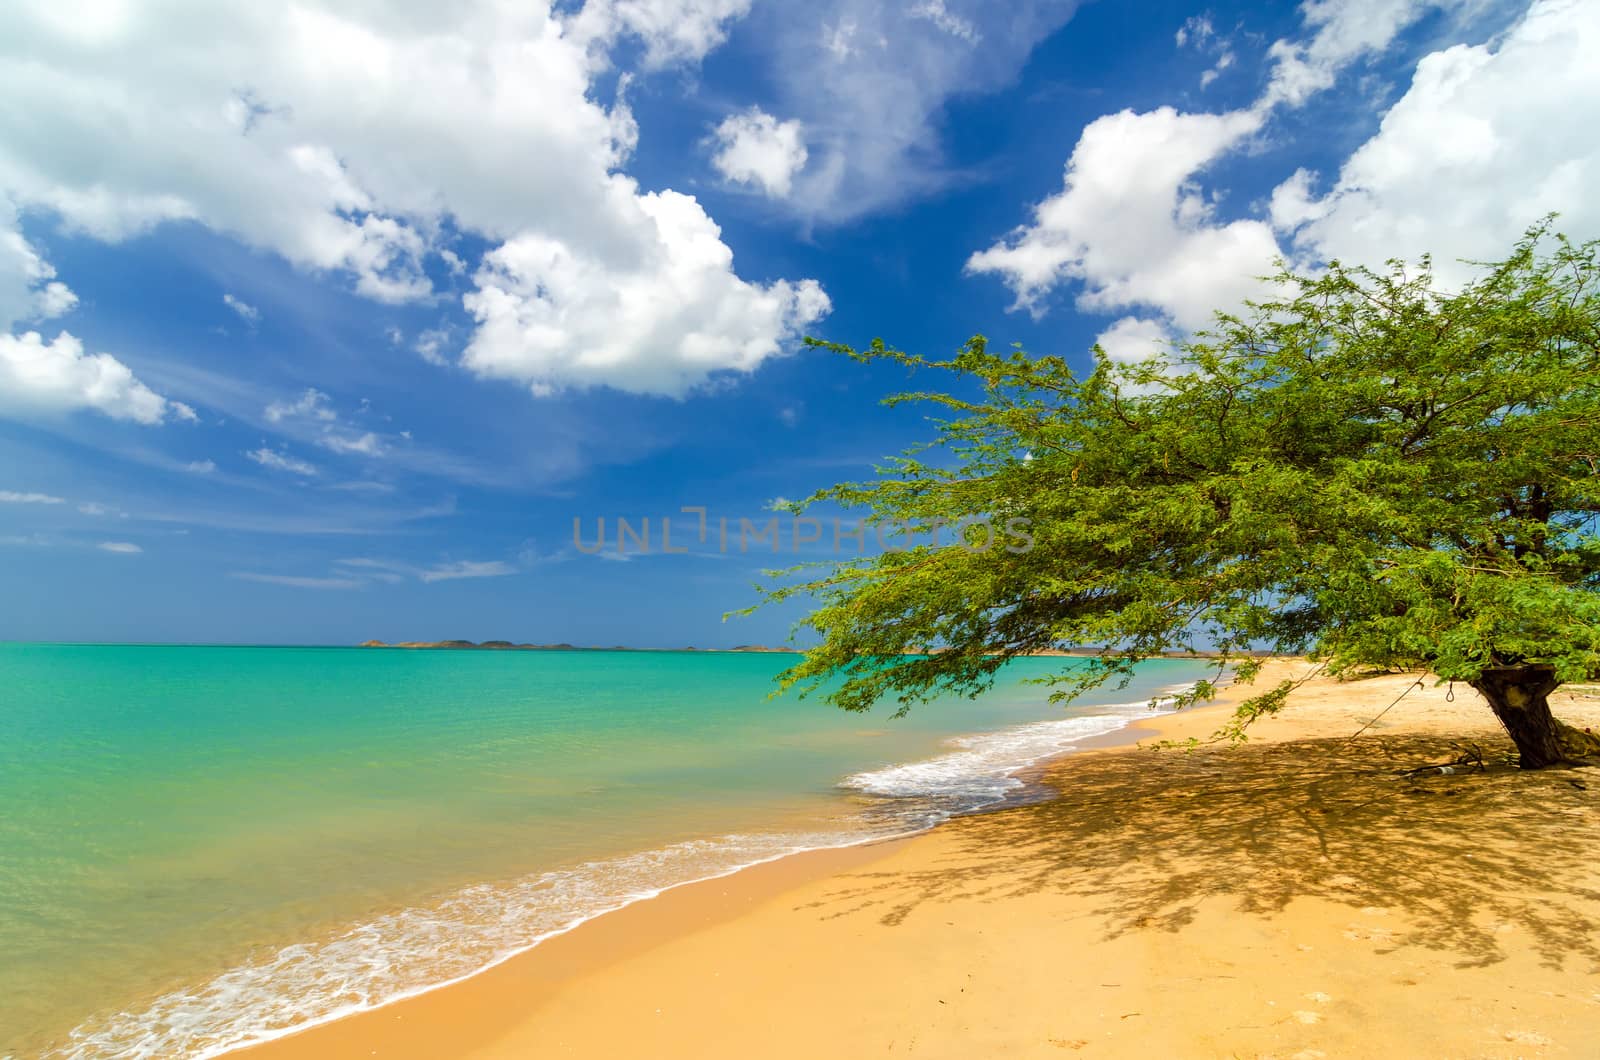 Deserted tropical beach in Pusheo in La Guajira, Colombia with a single solitary tree